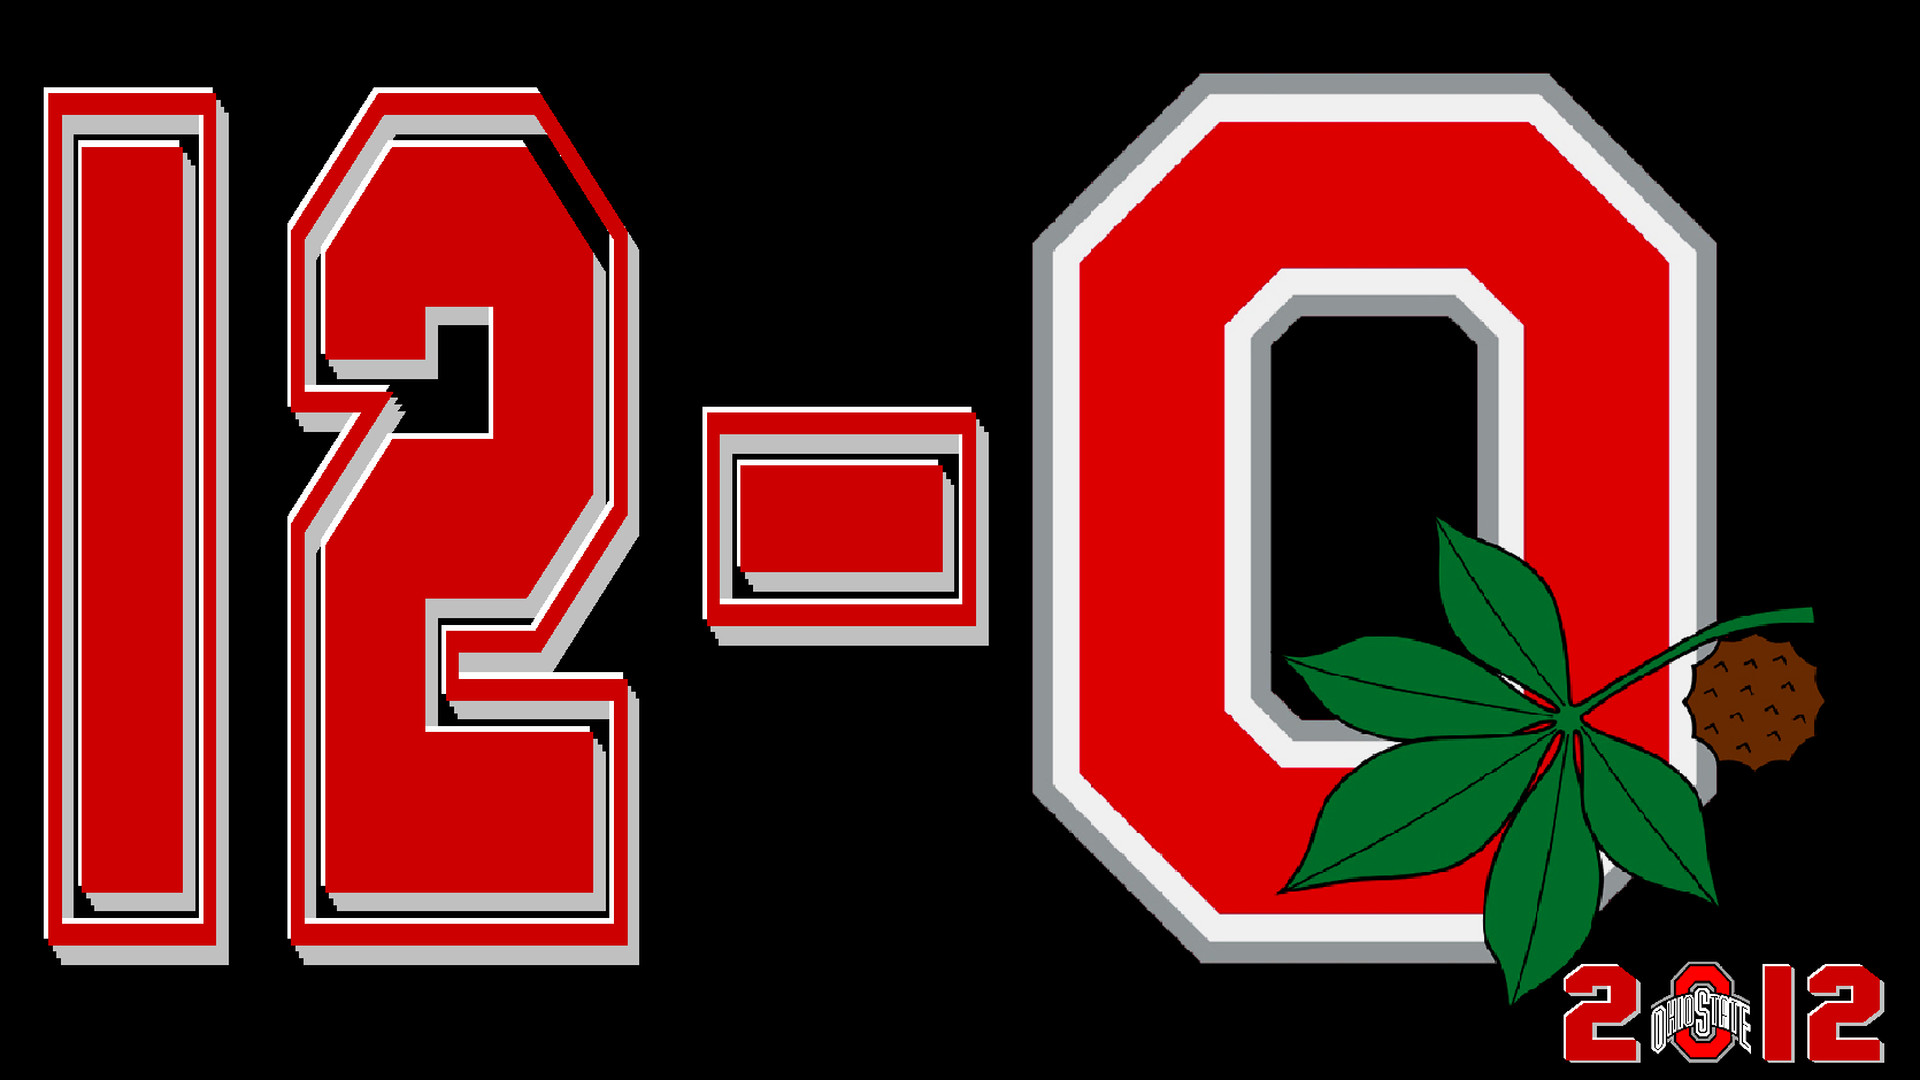 1920x1080 ... Ohio State Buckeyes Football Backgrounds Download | HD Wallpapers .